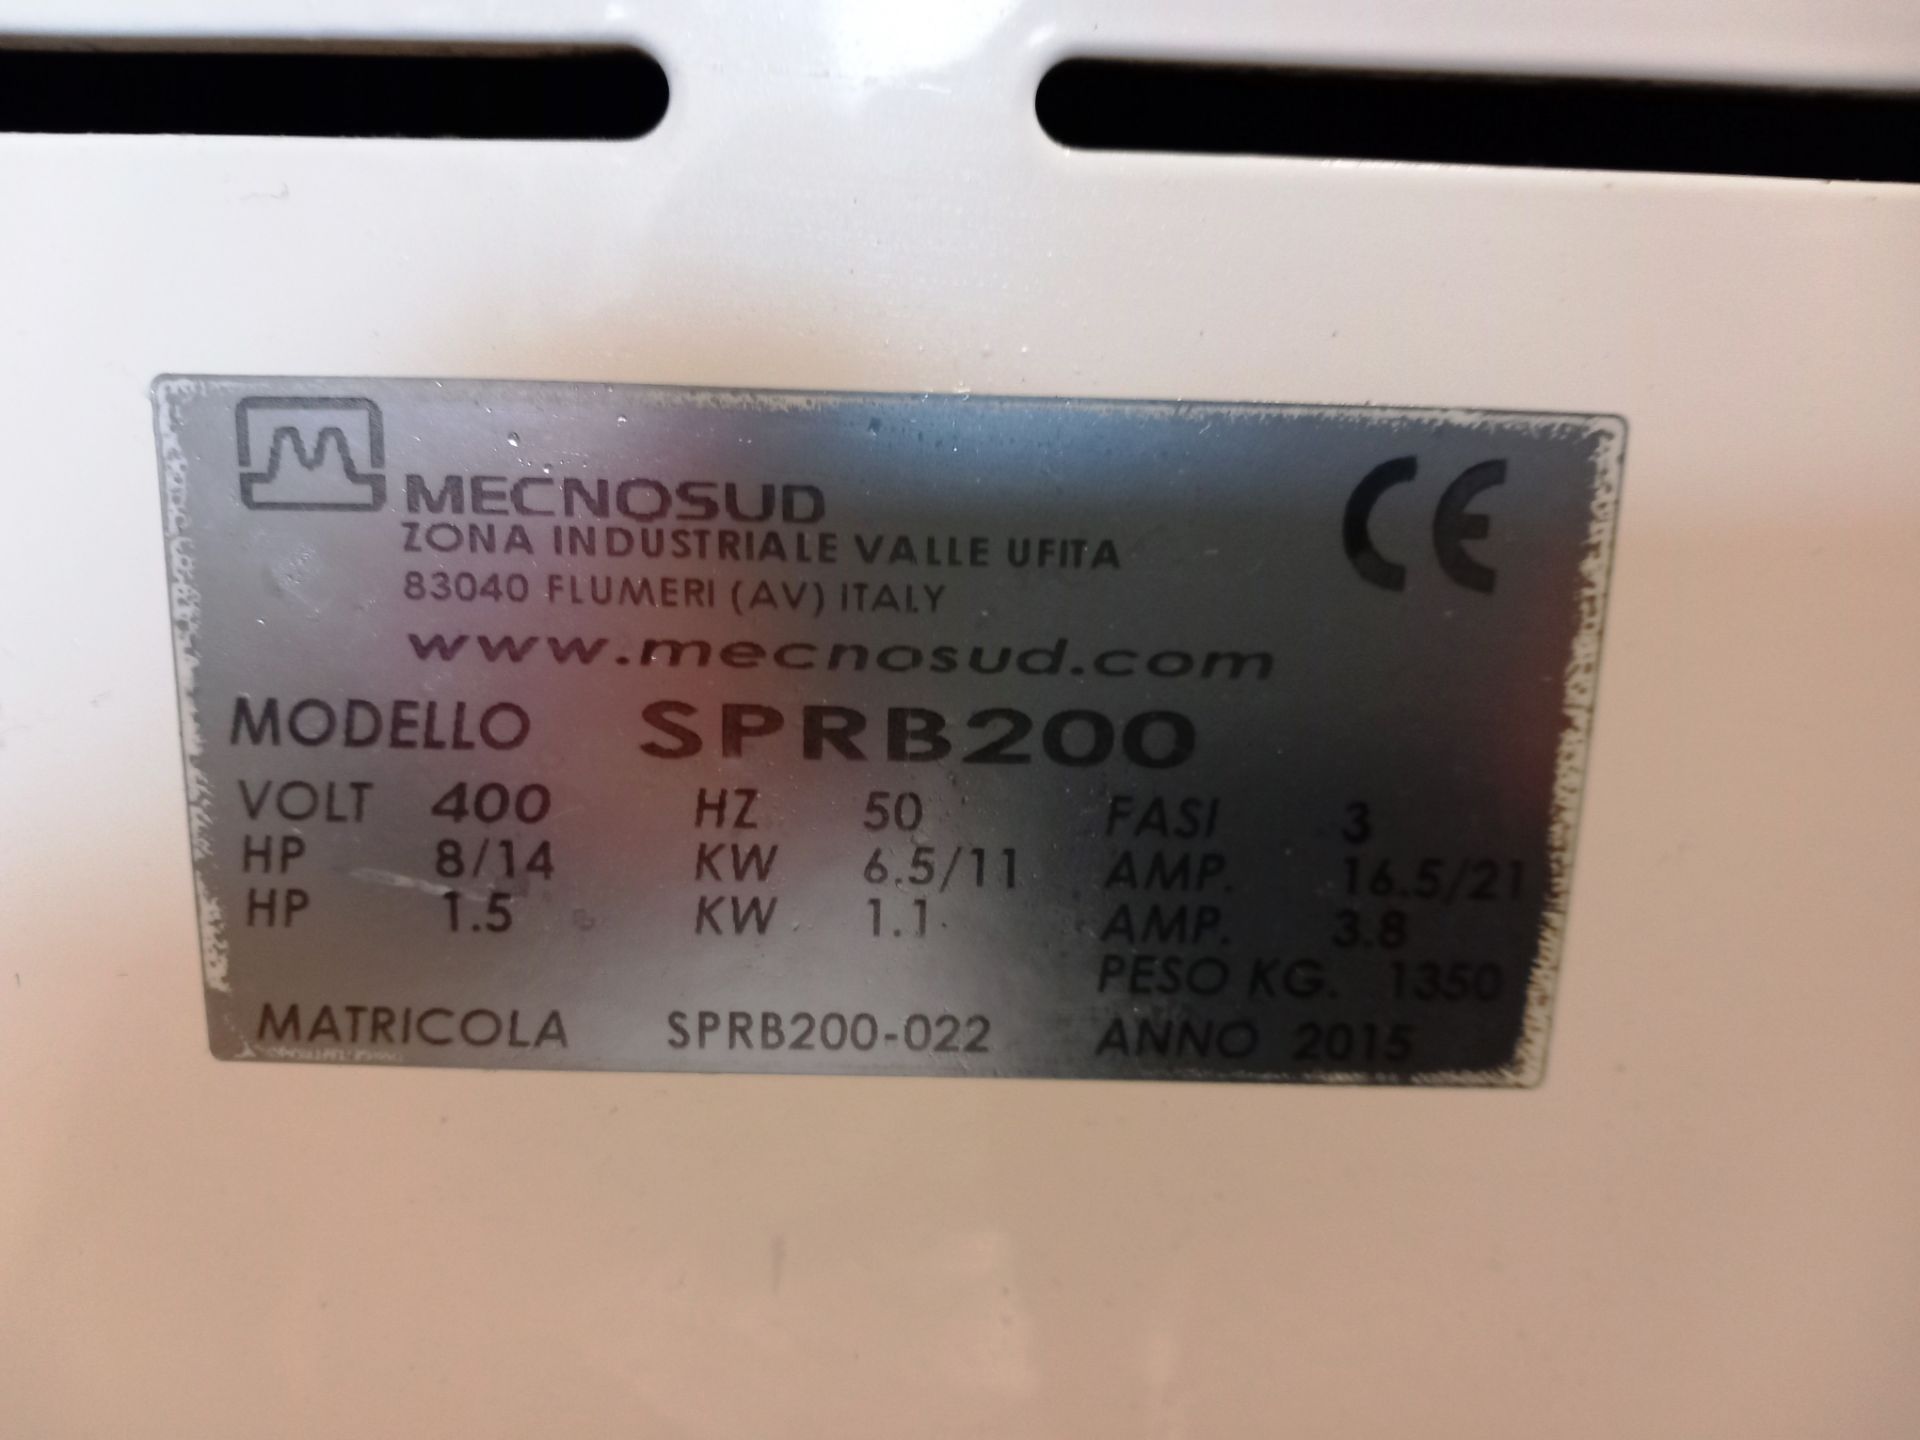 Mecnosud SPRB200 Auto Tipping 200 ltr Spiral Mixer (2015) 3 Phase - Image 6 of 6